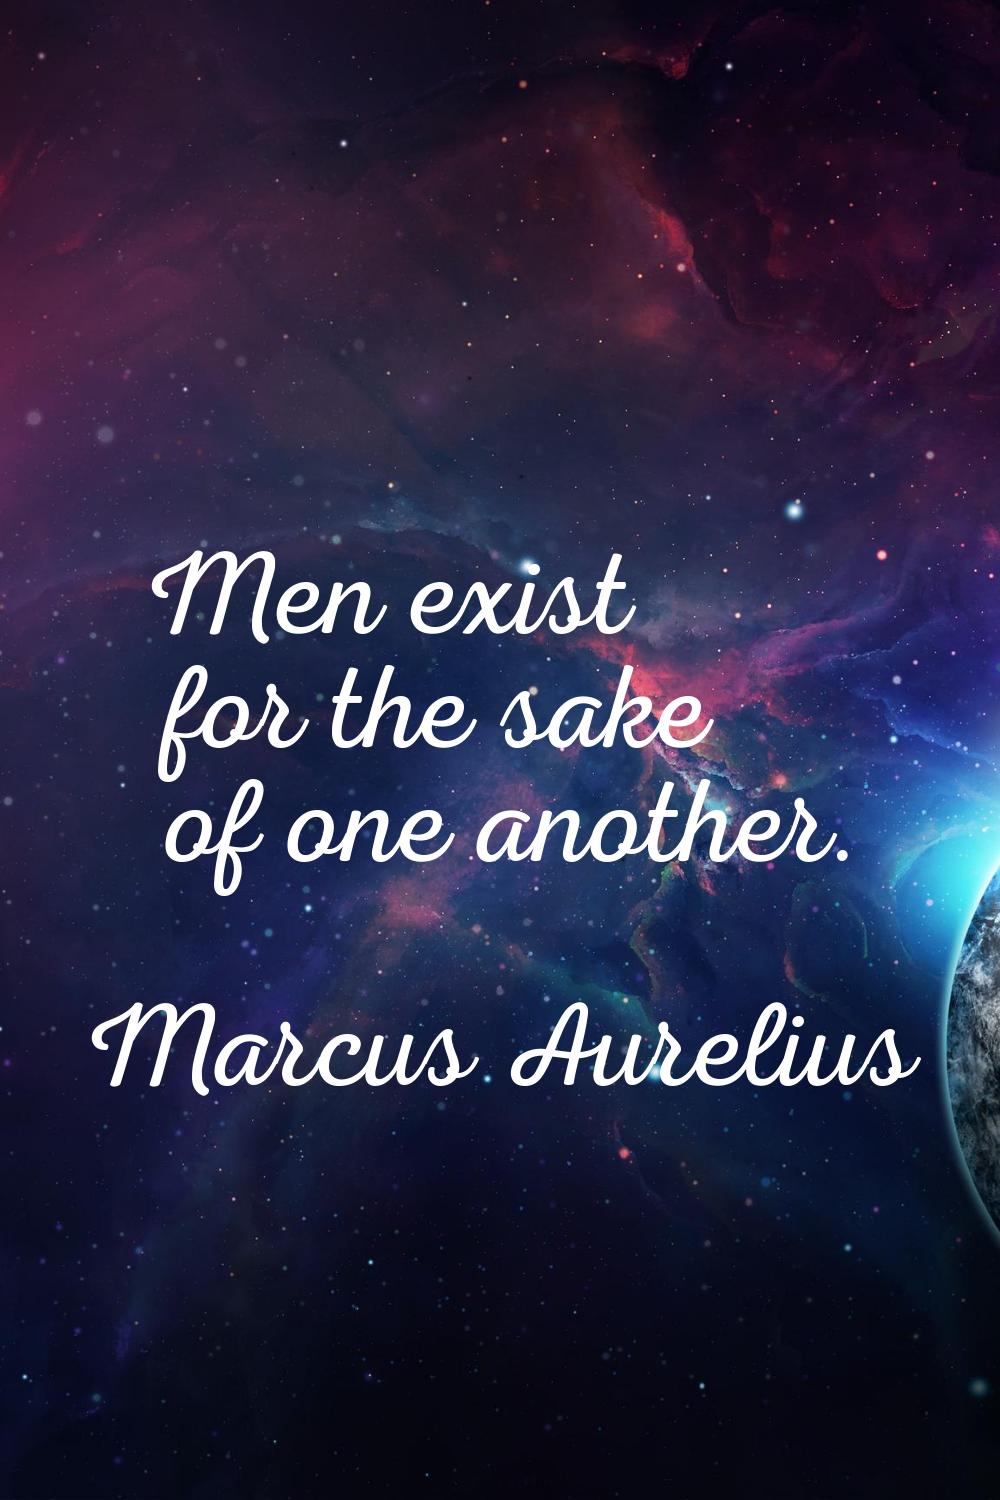 Men exist for the sake of one another.